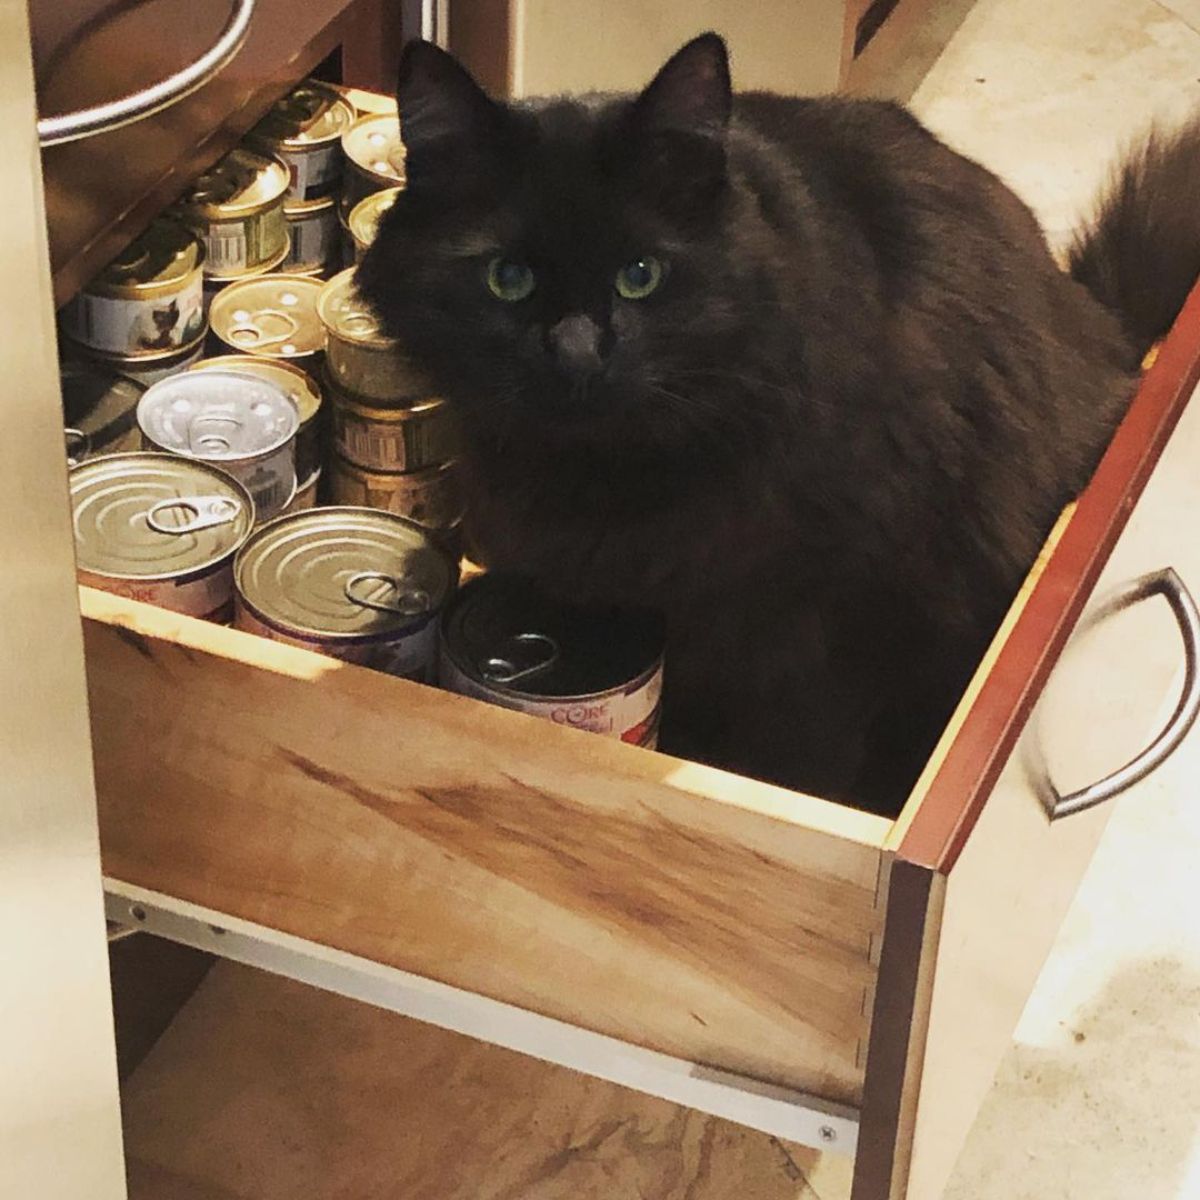 An adorable black maine coon kitten sitting in a drawer full of cans.